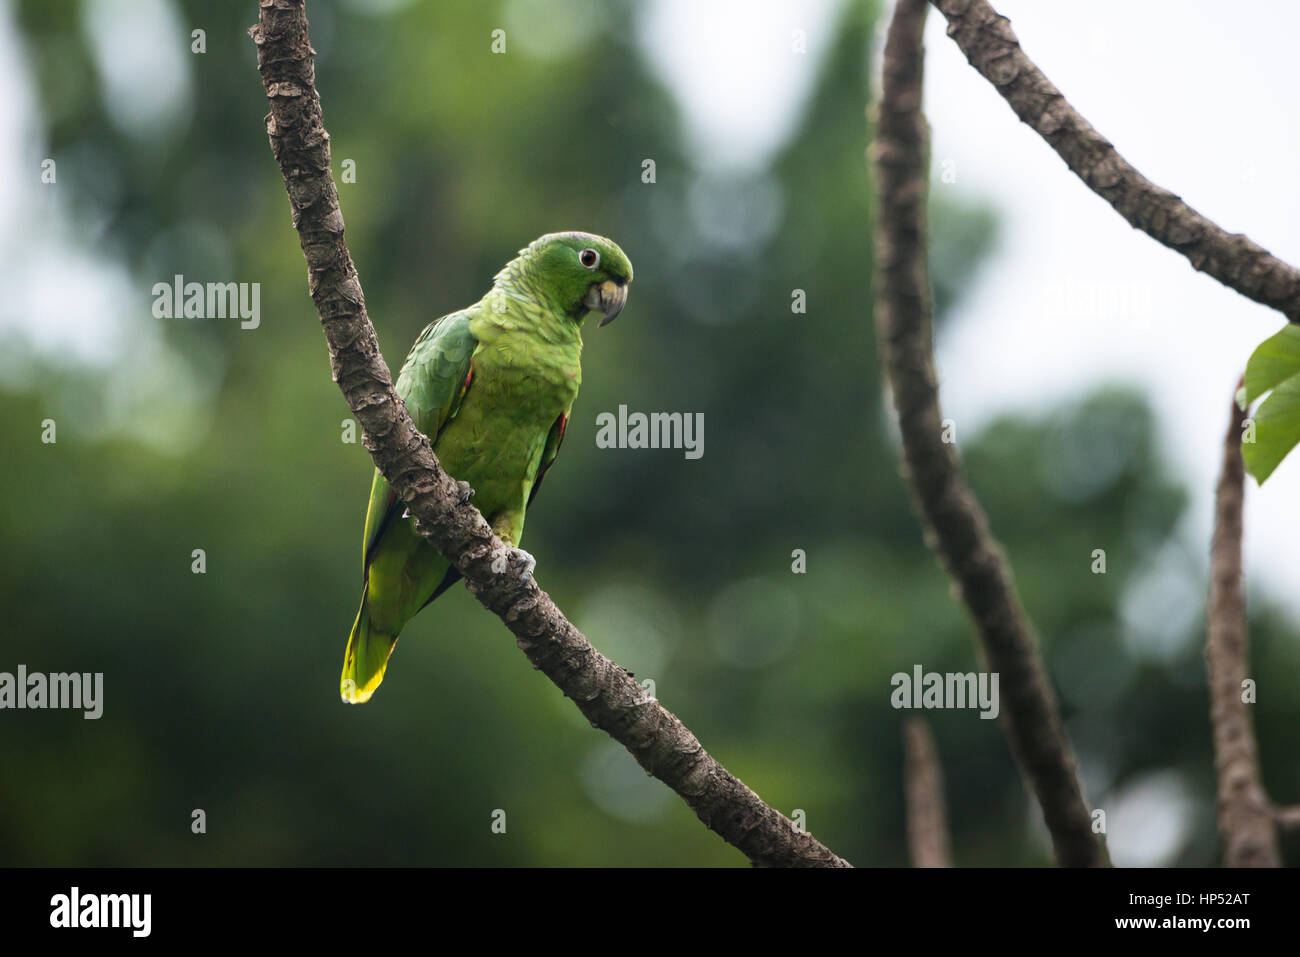 A Mealy Parrot from the island of Ilhabela, Brazil Stock Photo